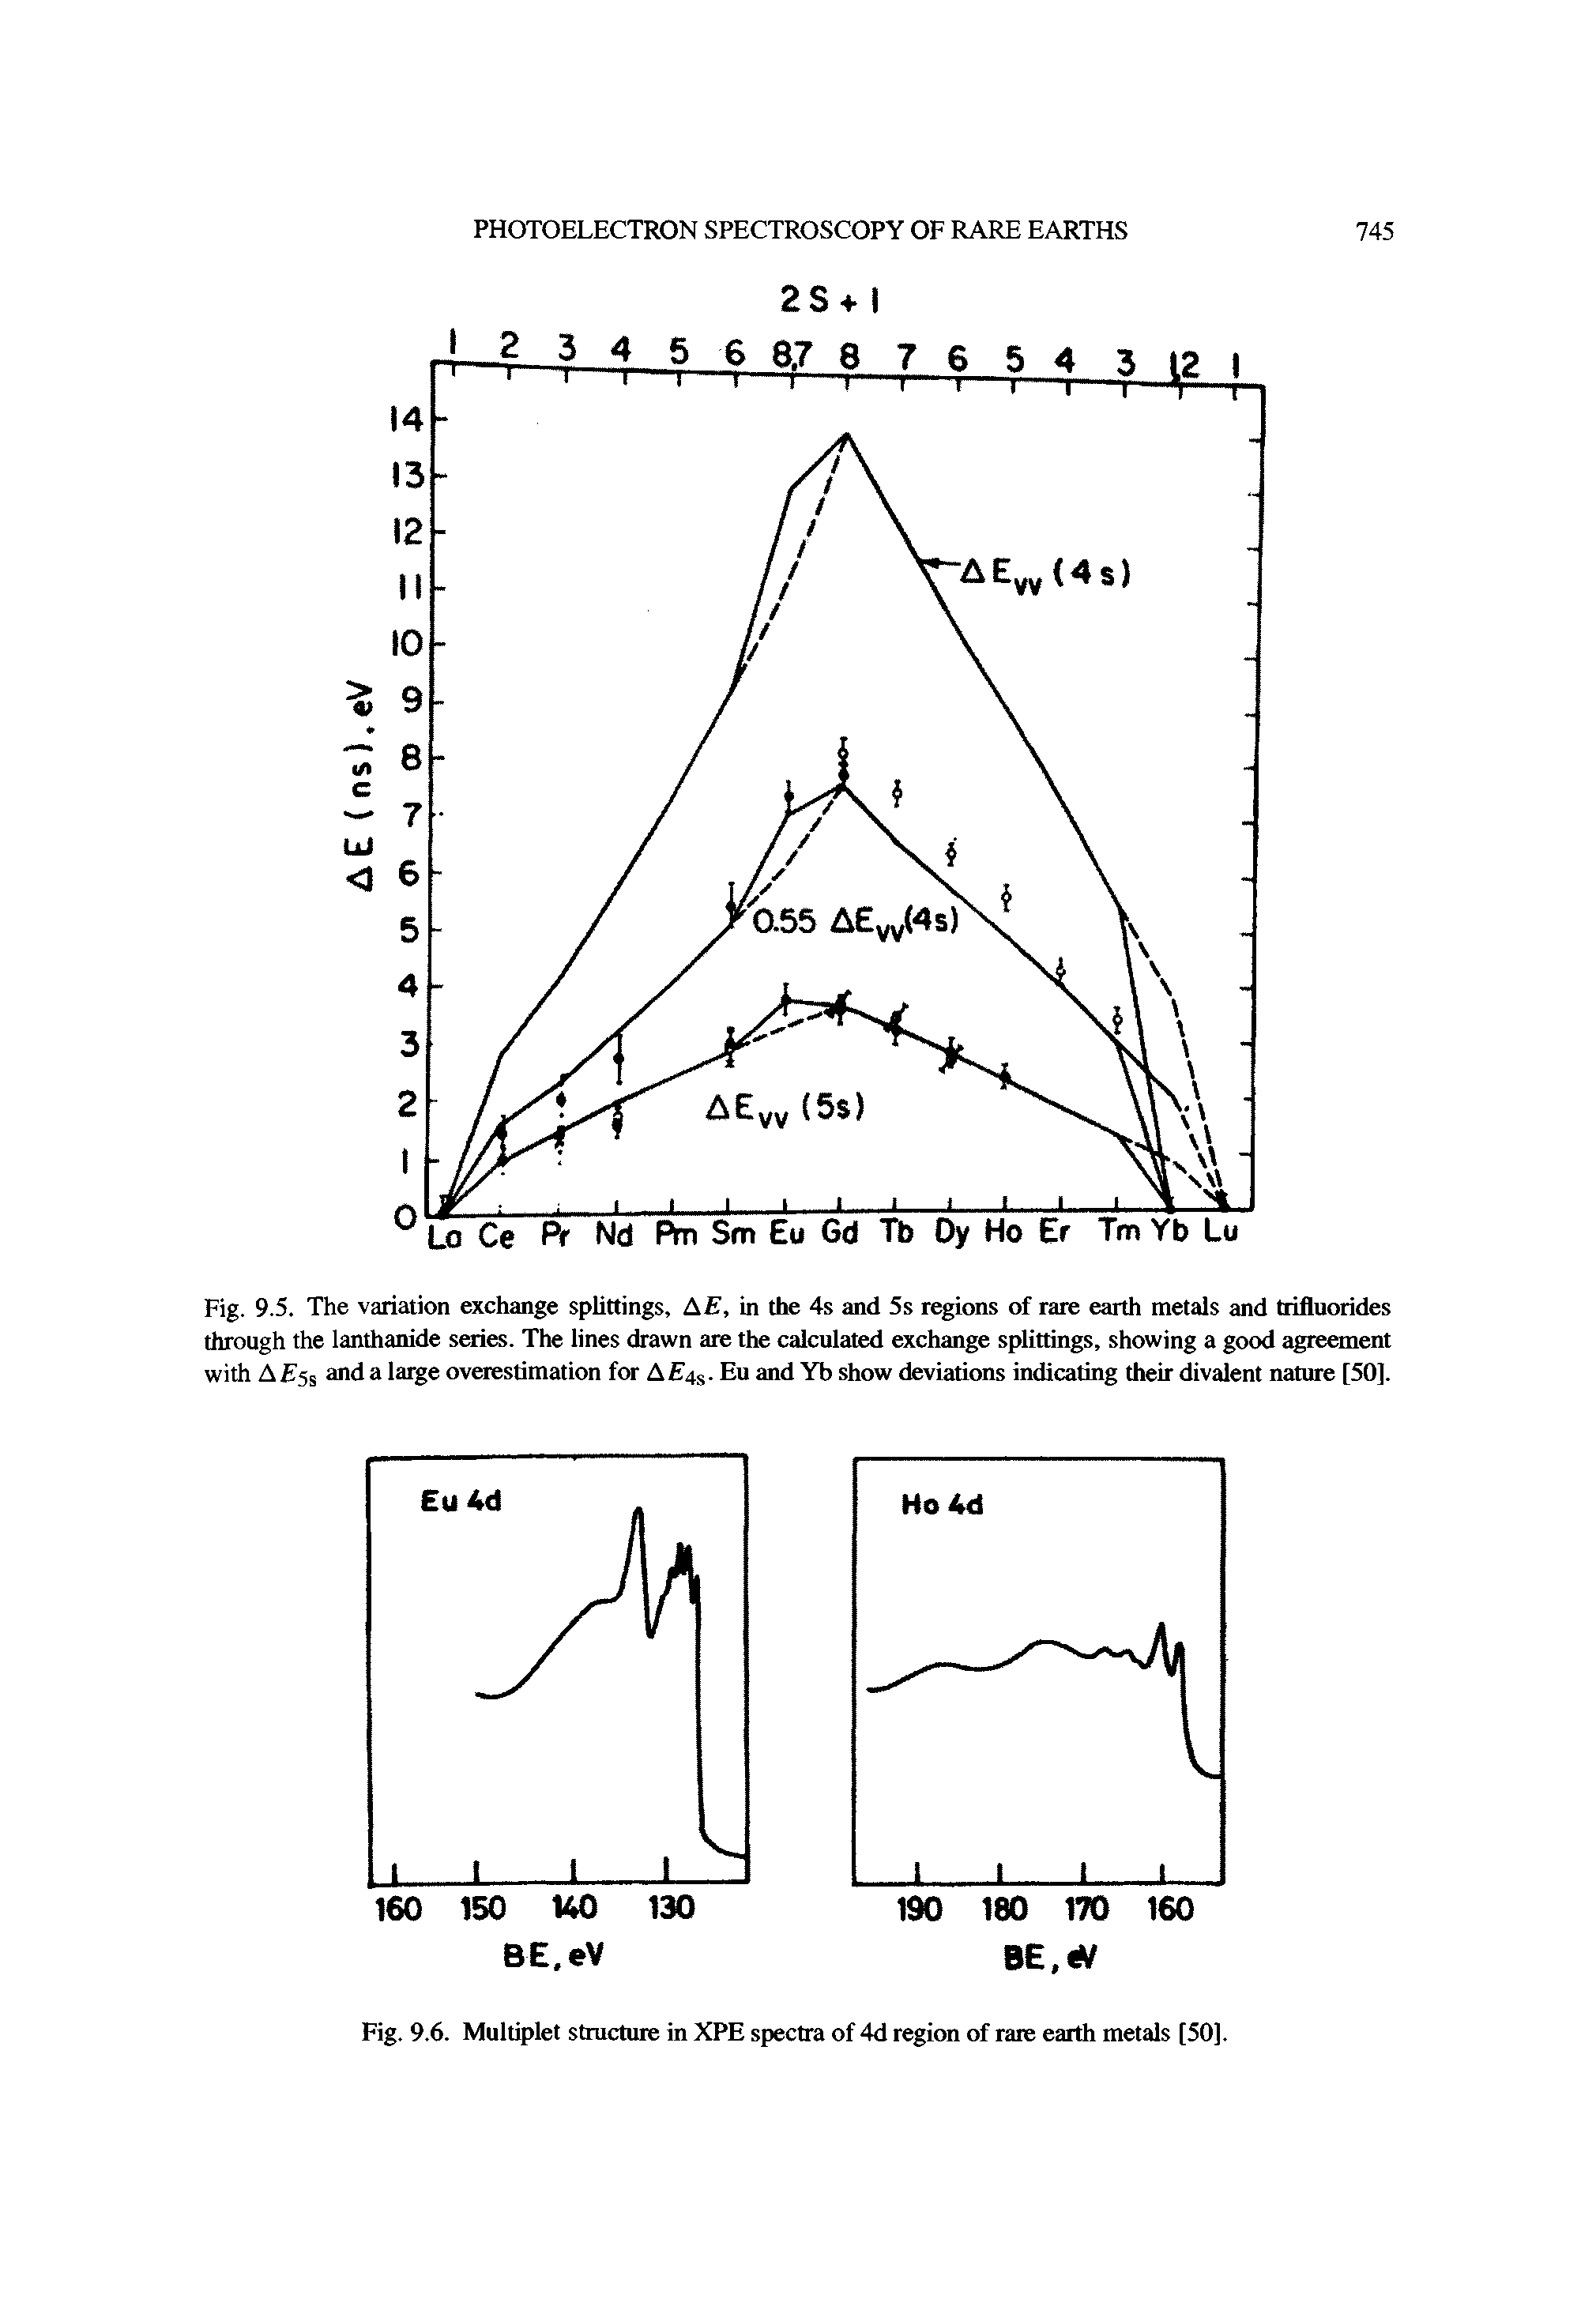 Fig. 9.5. The variation exchange splittings, AE, in the 4s and 5s regions of rare earth metals and trifluorides through the lanthanide series. The lines drawn are the calculated exchange splittings, showing a good agreement with A E5S and a large overestimation for A 4. Eu and Yb show deviations indicating their divalent nature [50].